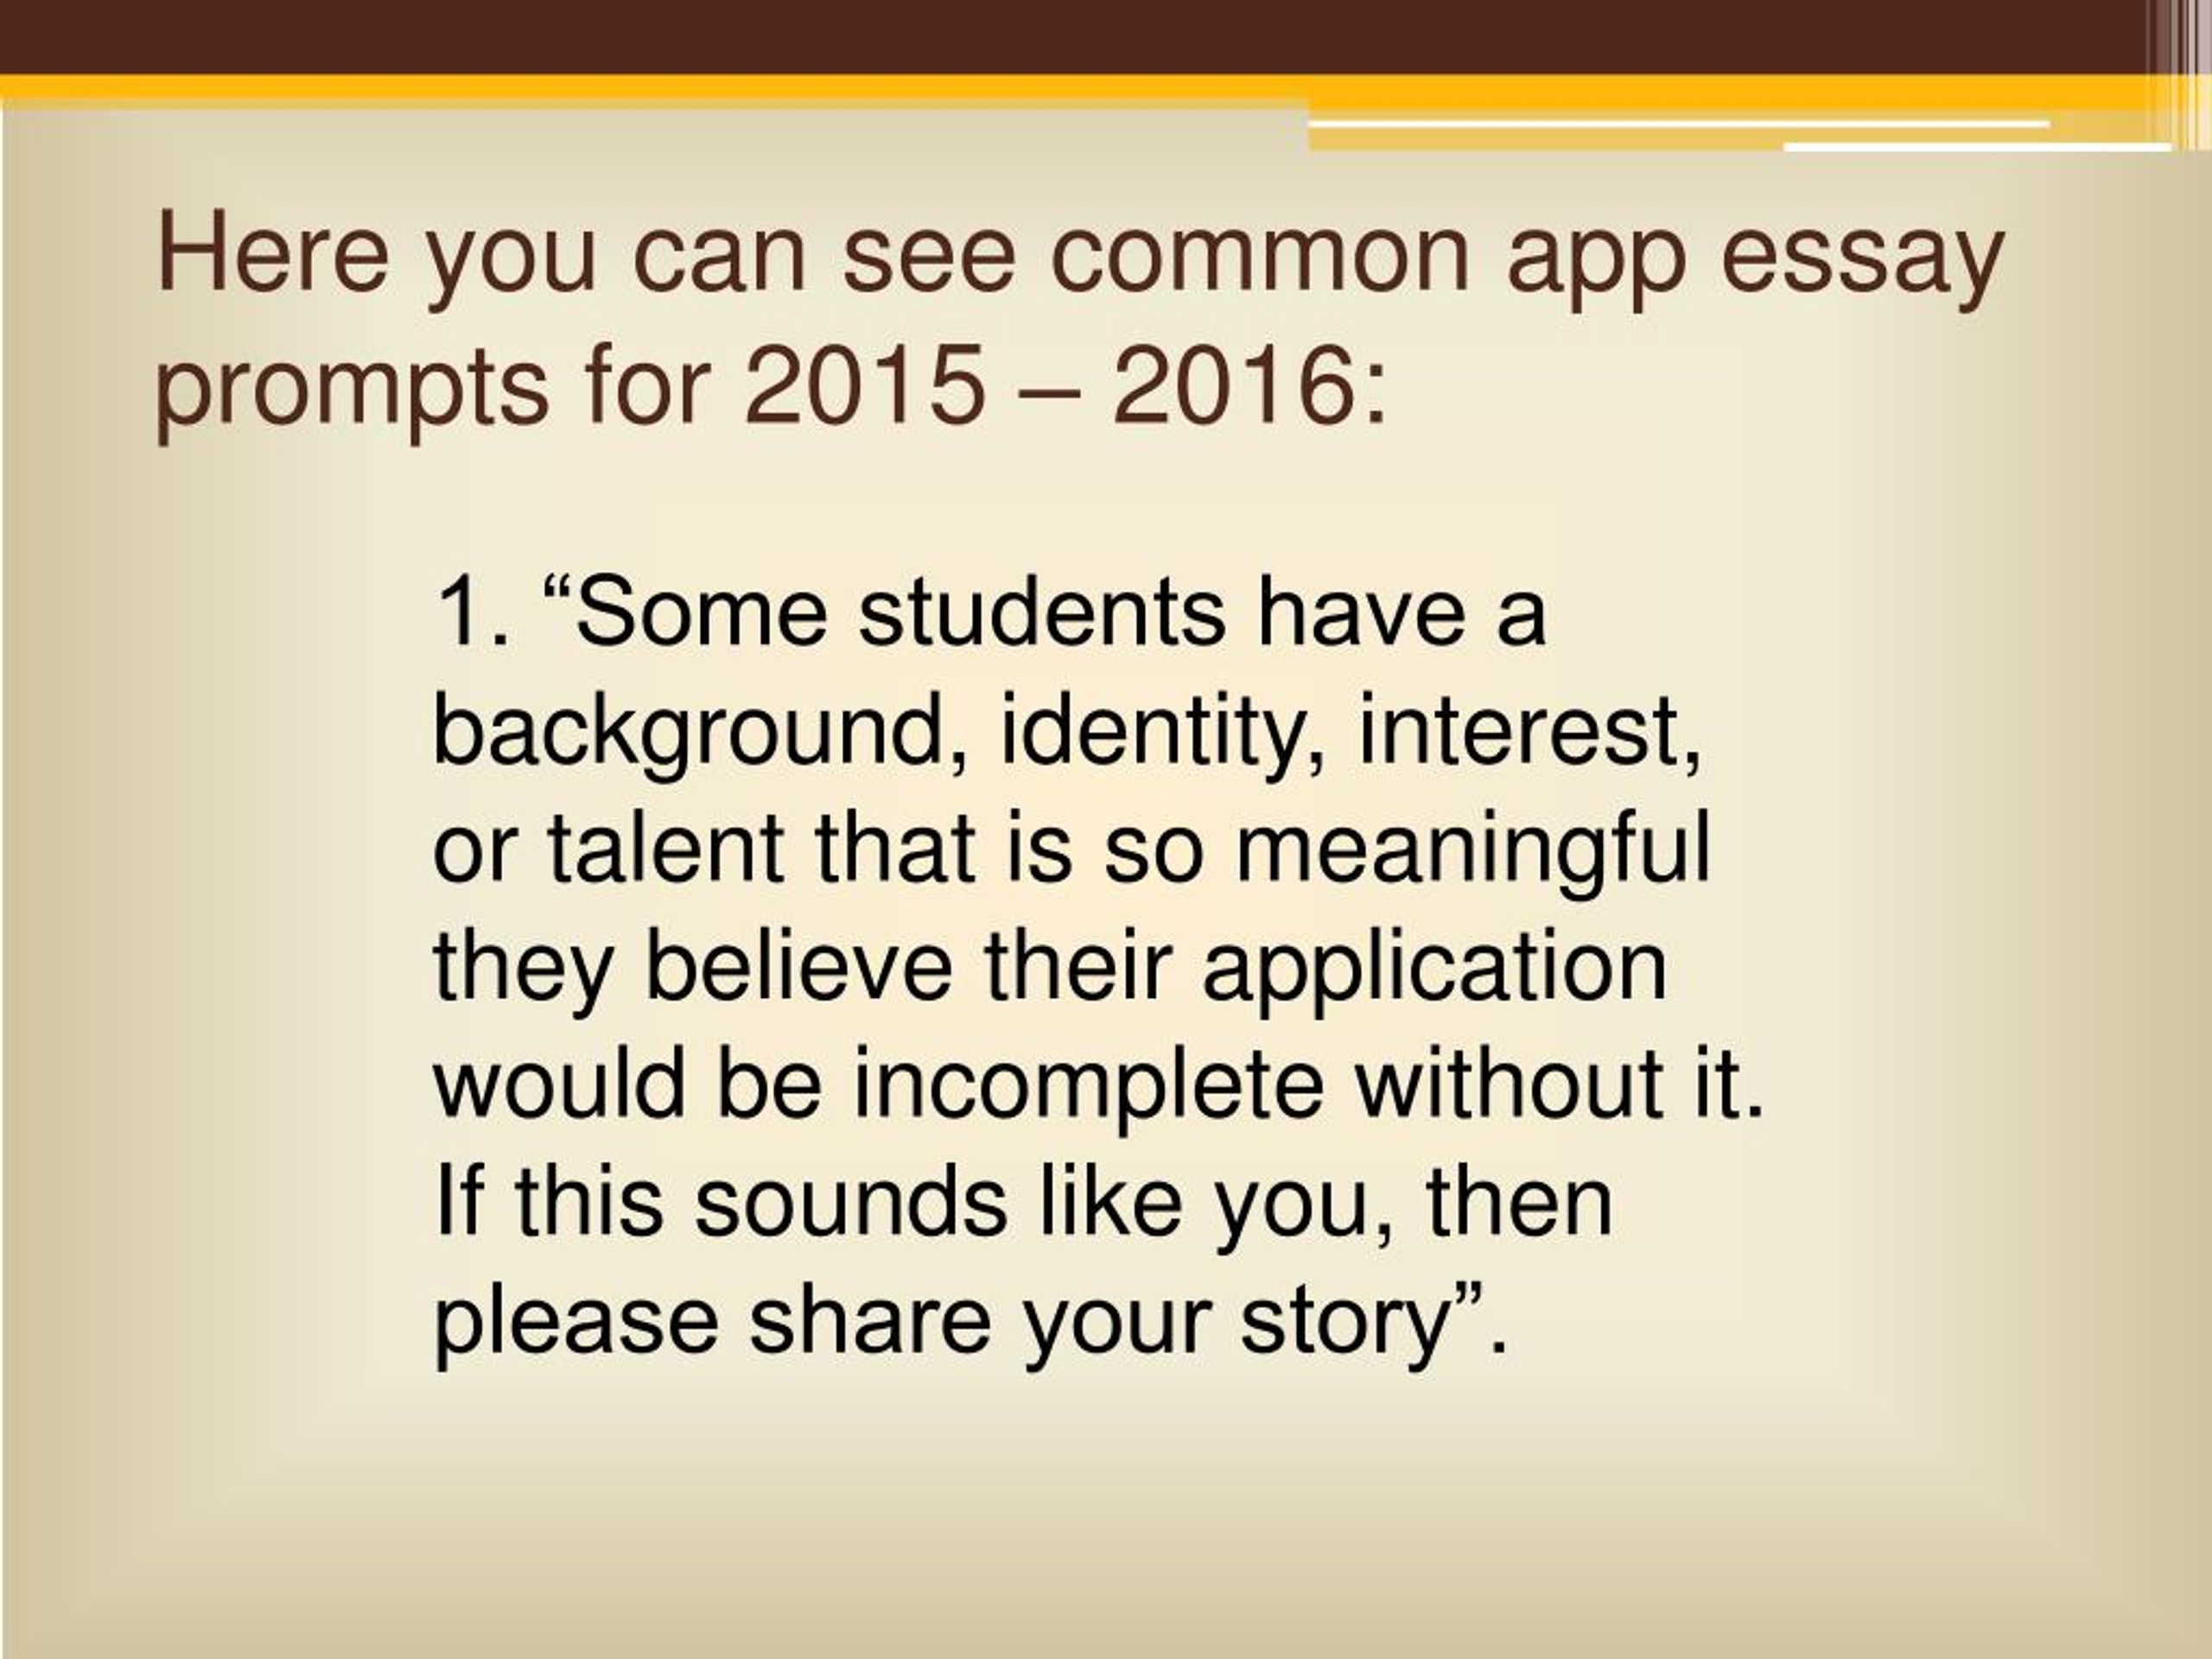 PPT Common App Essay Questions PowerPoint Presentation, free download